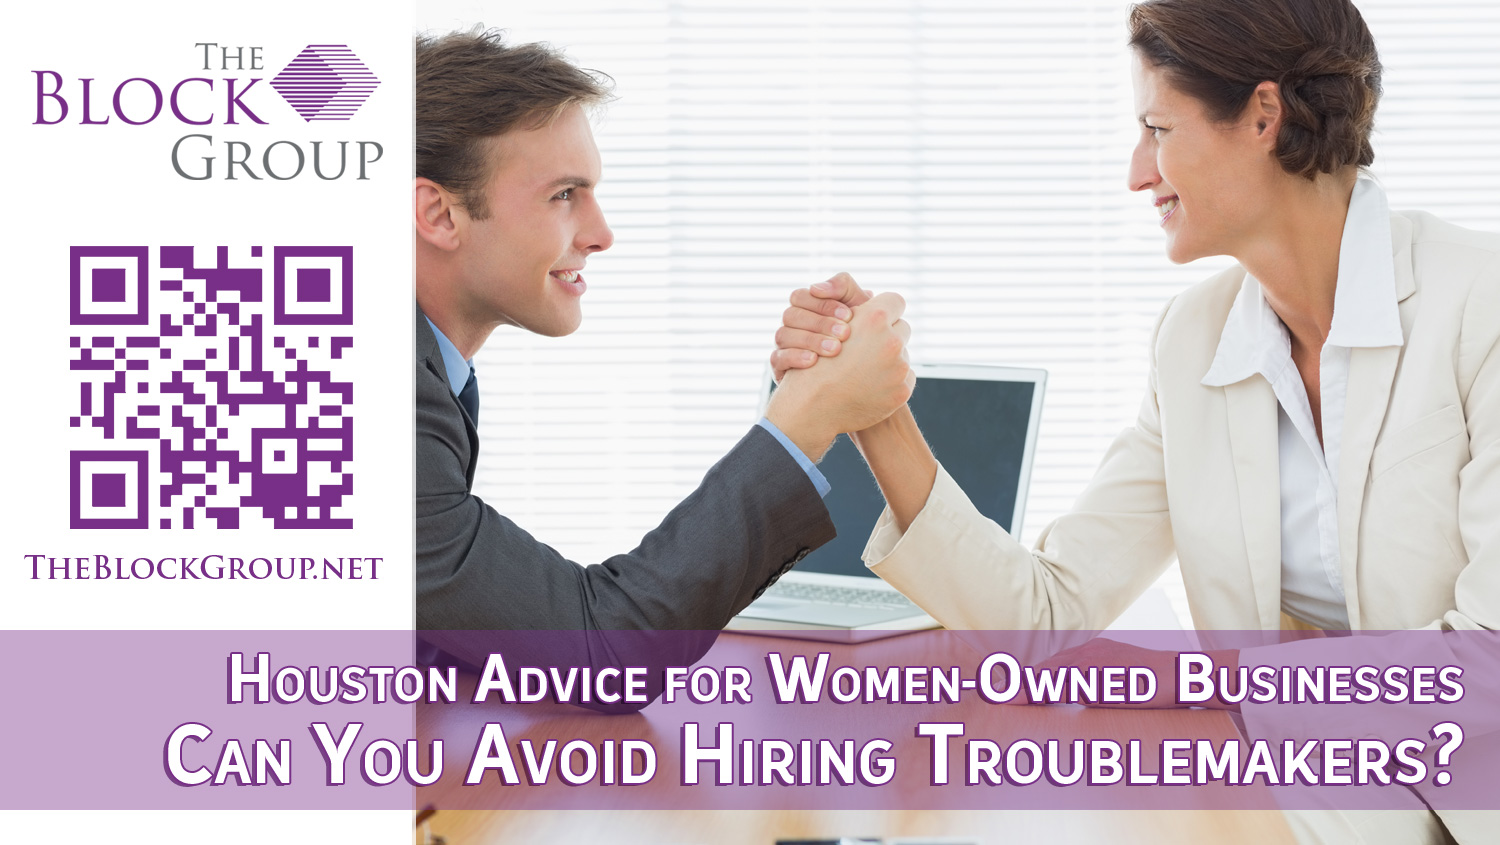 06-Houston-Advice-for-Women-Owned-Businesses